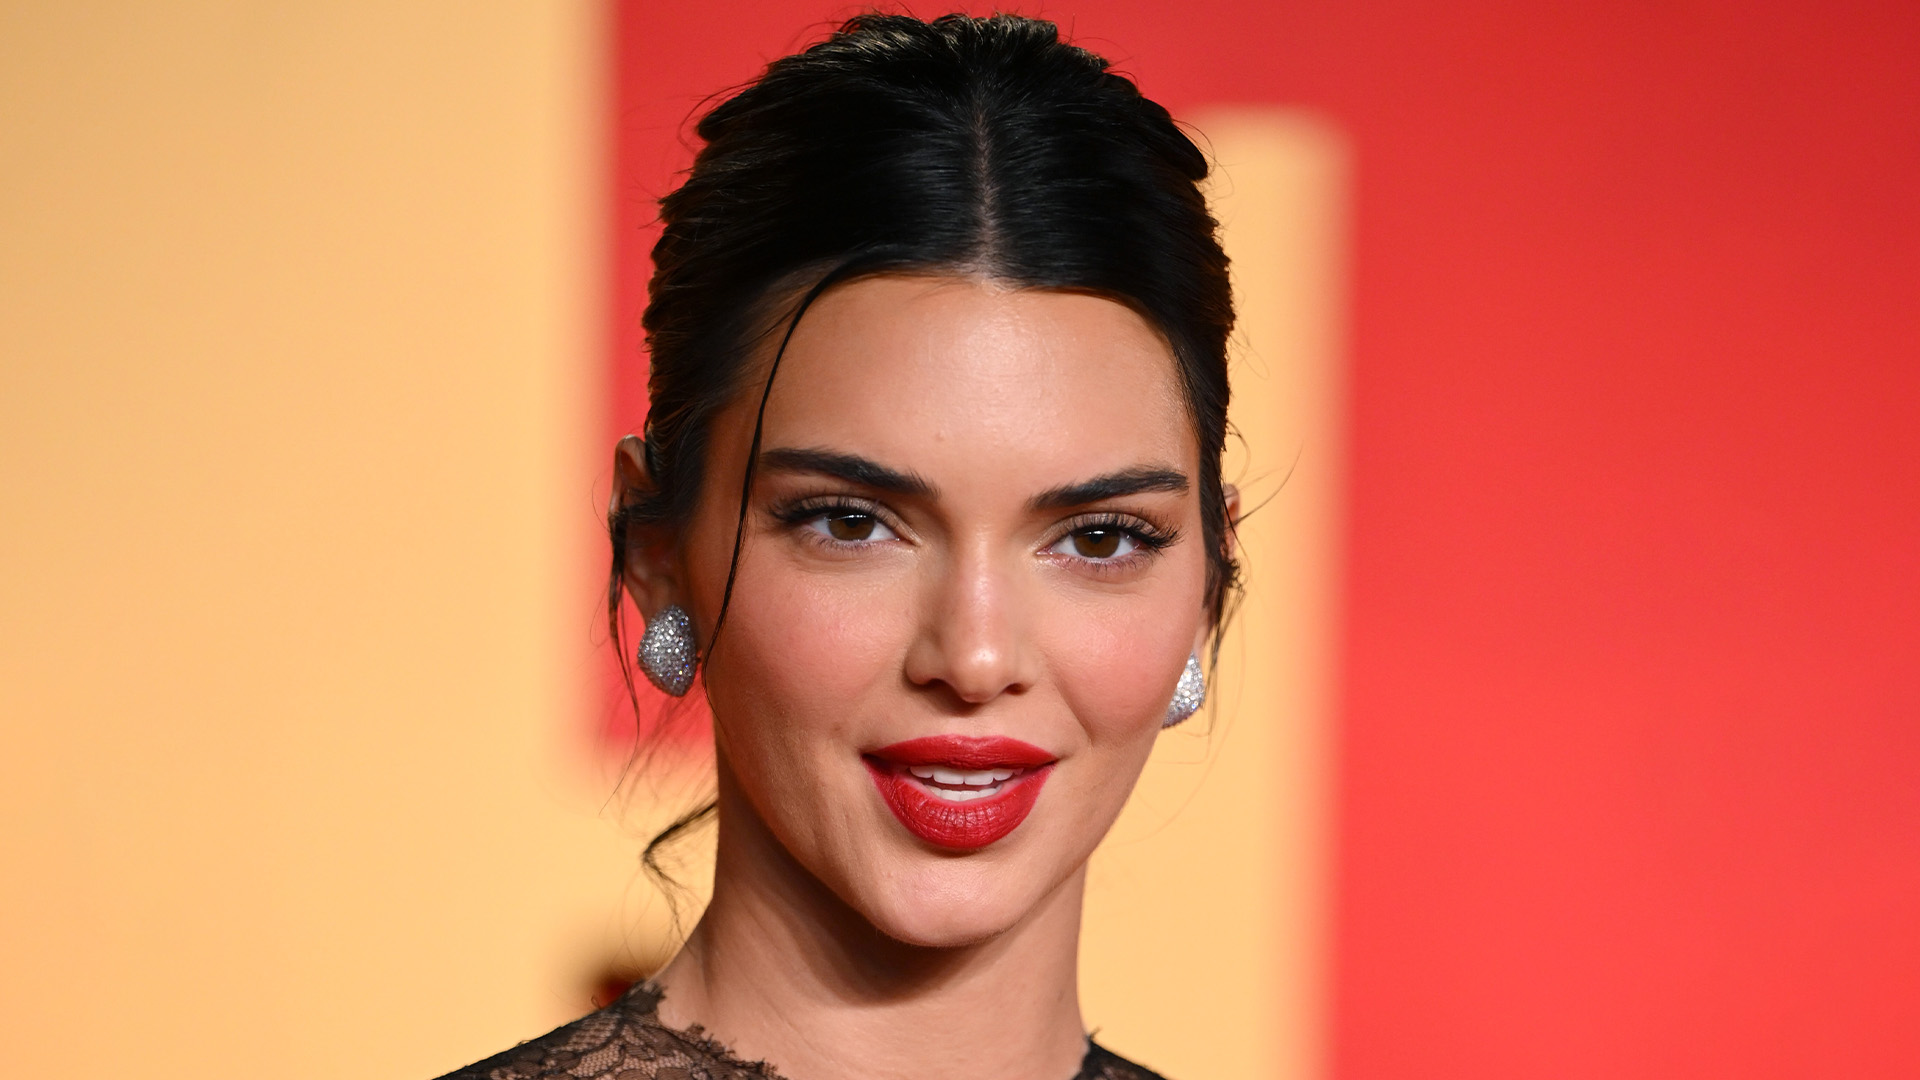 Kendall Jenner Embraces Real Skin with Wrinkles and Blemishes Amid Plastic Surgery Accusations – Authentic Beauty Revealed!